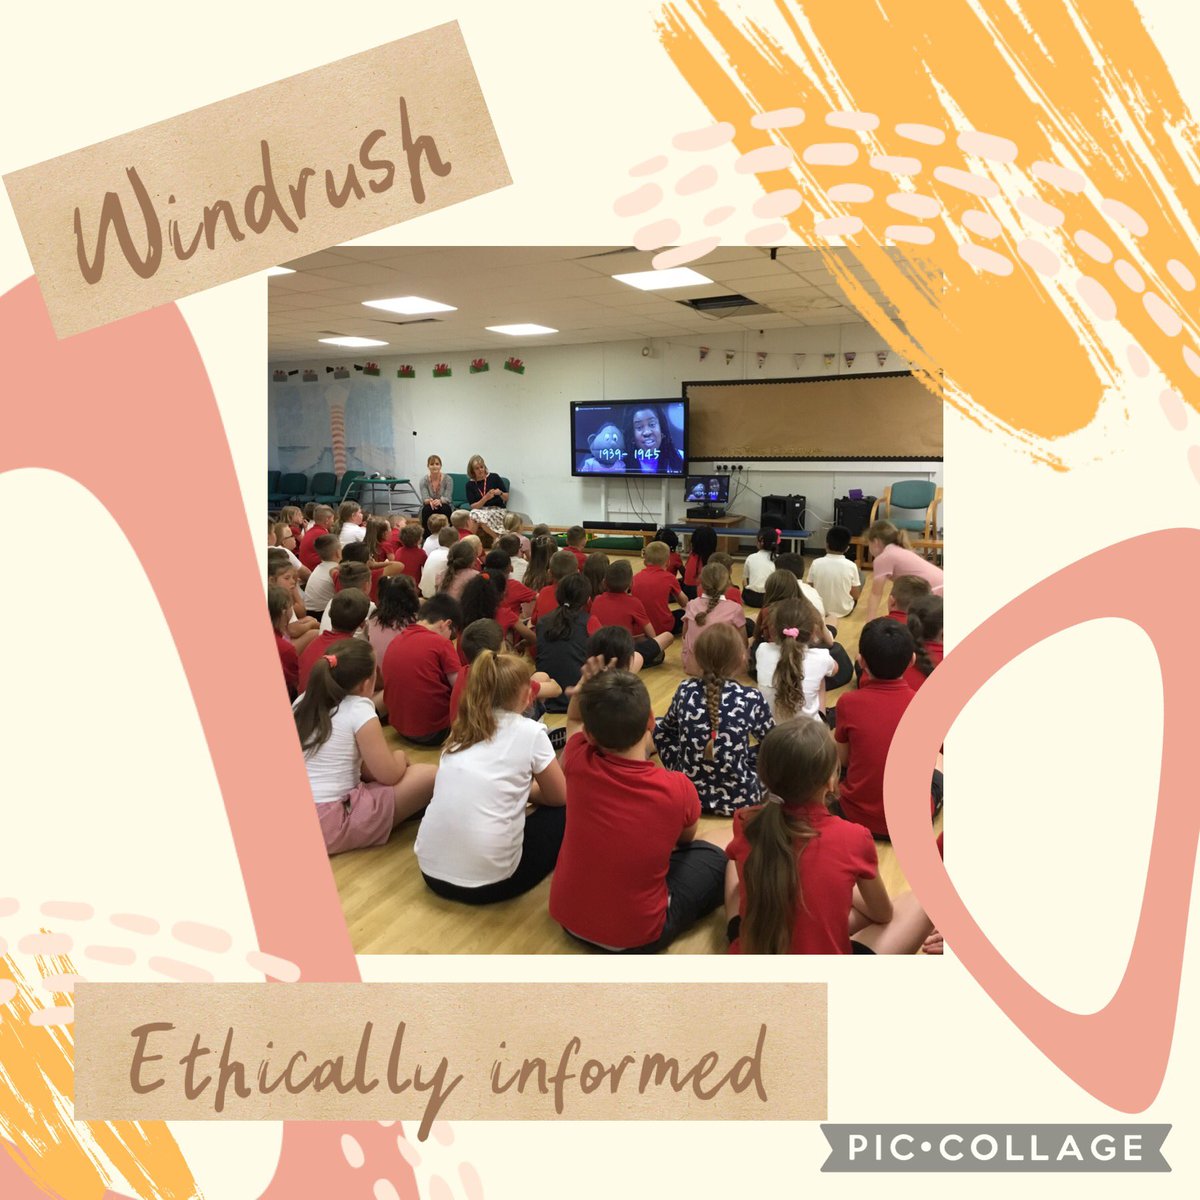 Learning all about Windrush Day. Today is 75 years since the Empire Windrush arrived in the UK. #ethicallyinformed #WeAllHaveRights @MillbrookP